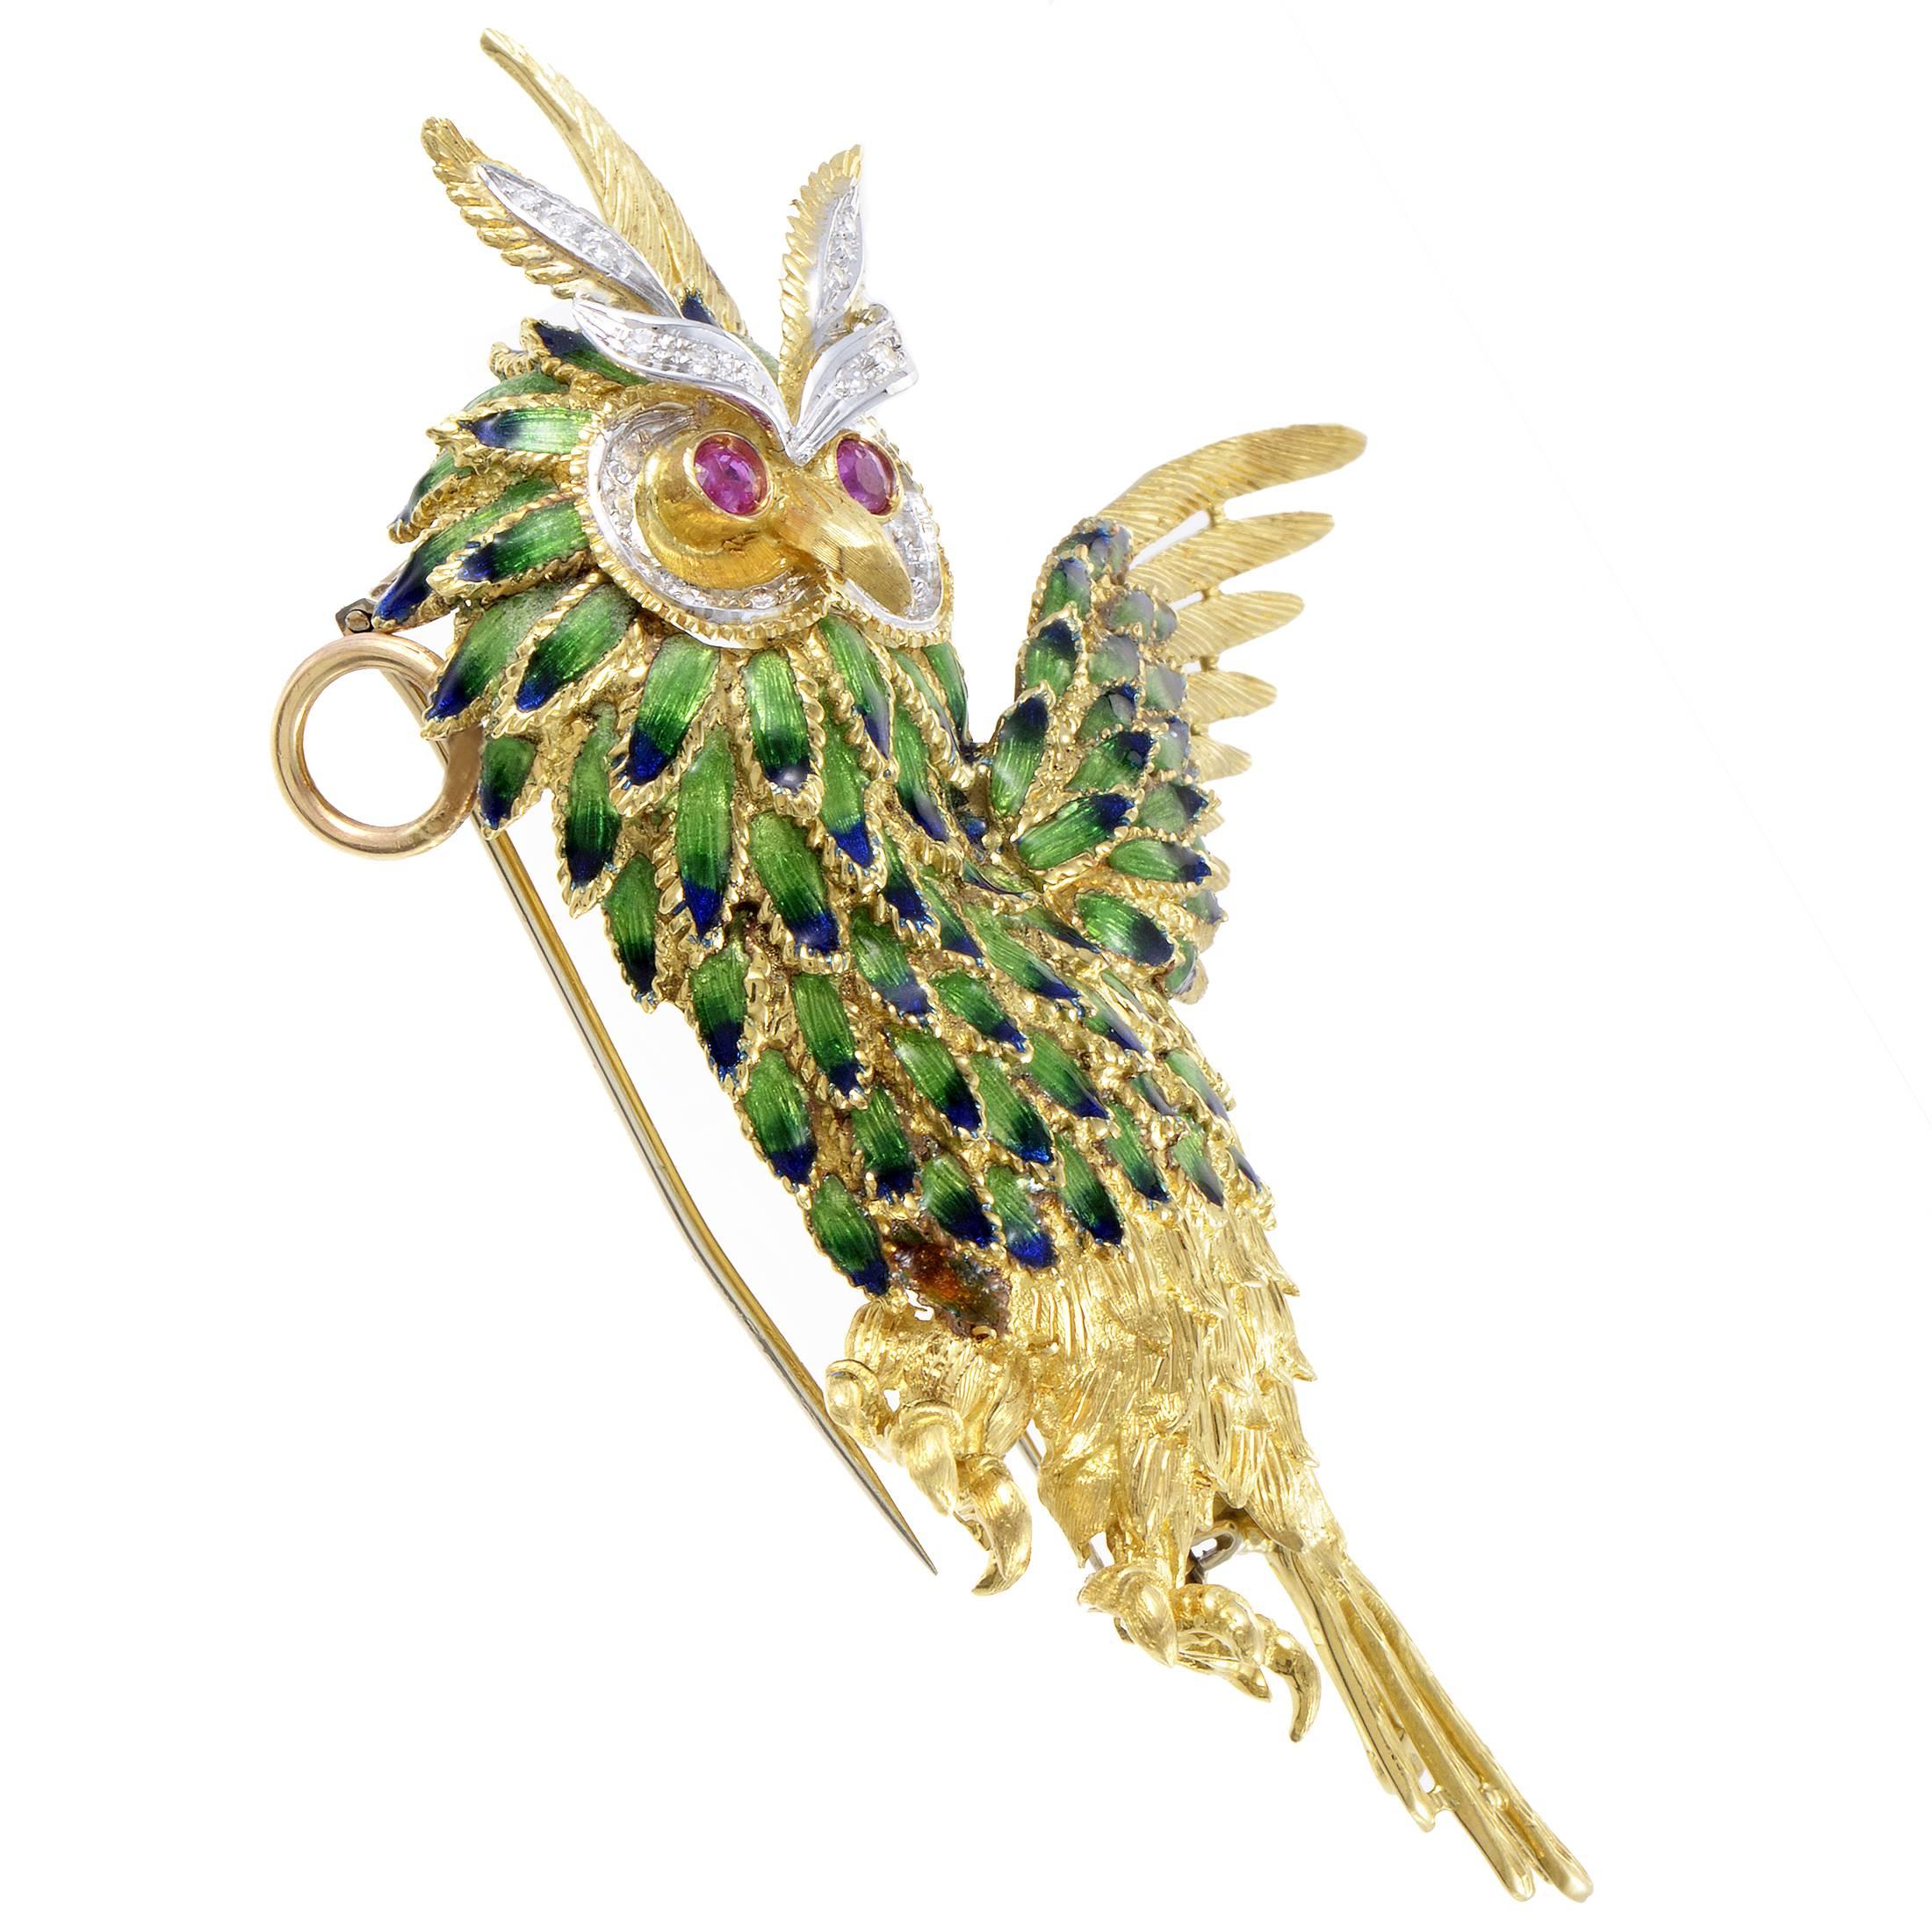 Employing astonishing gradient enamel to realistically depict the colorful beauty of an owl, this fantastic 18K yellow gold brooch also boasts gorgeous rubies as the adorable bird's eyes while sparkling diamonds totaling 0.25ct are set against